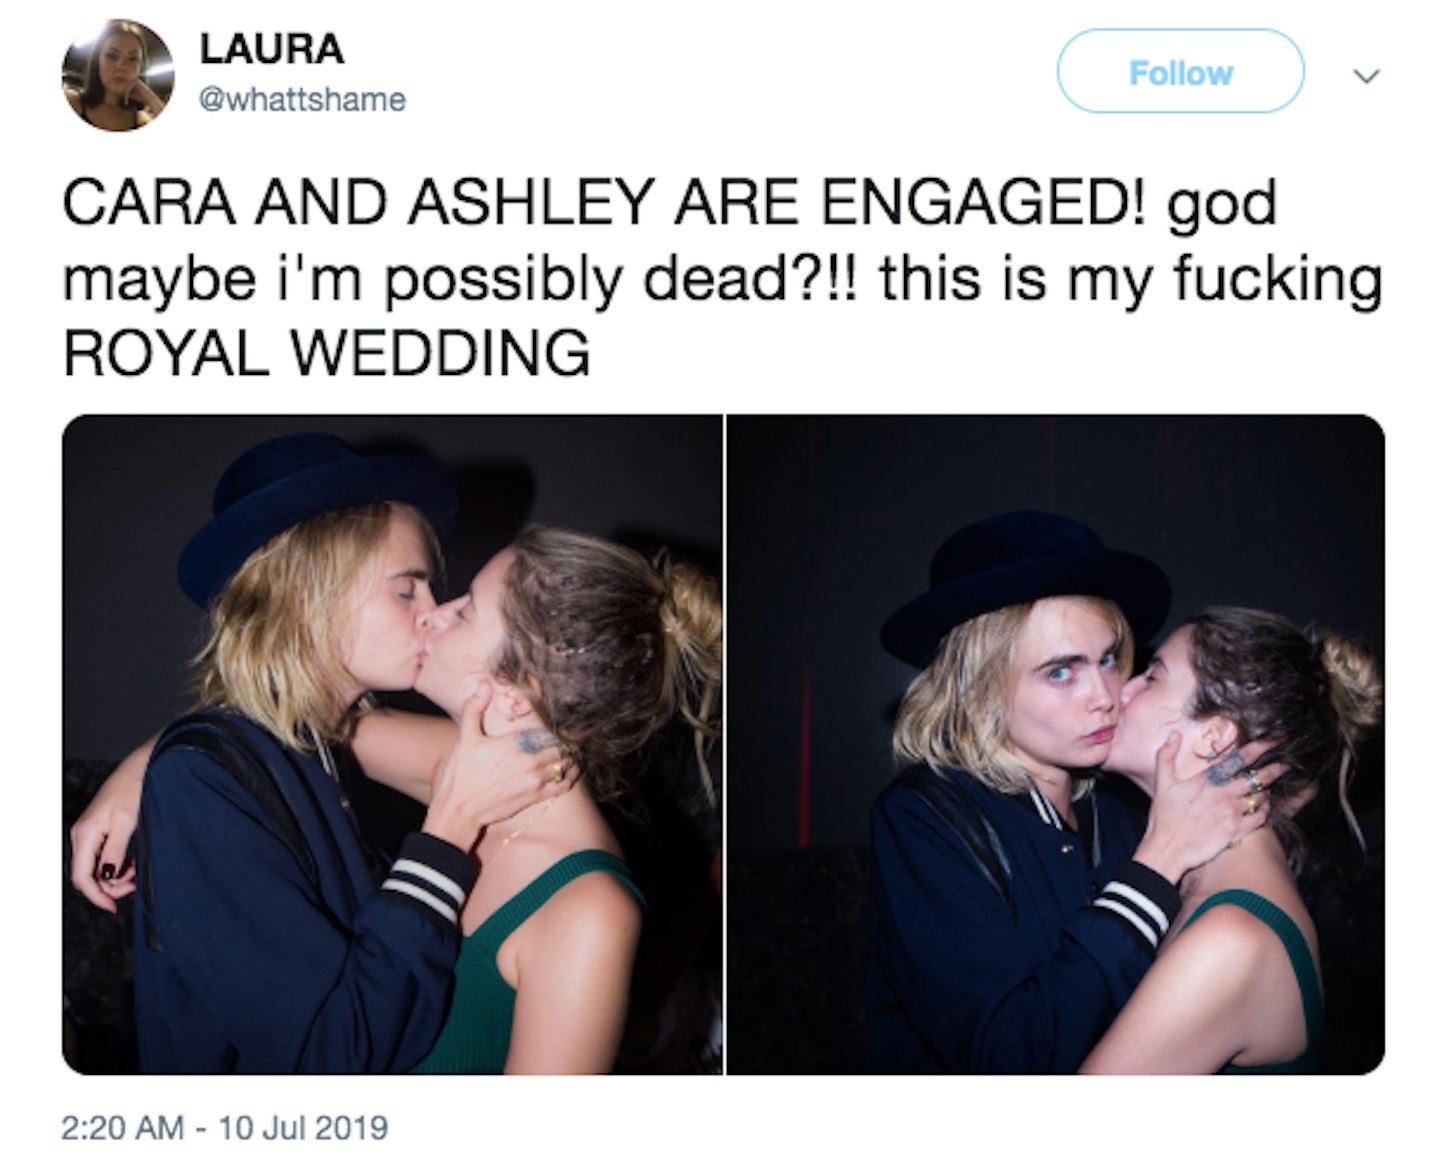 The Best Reactions To Ashley Benson And Cara Delevingne's Engagement